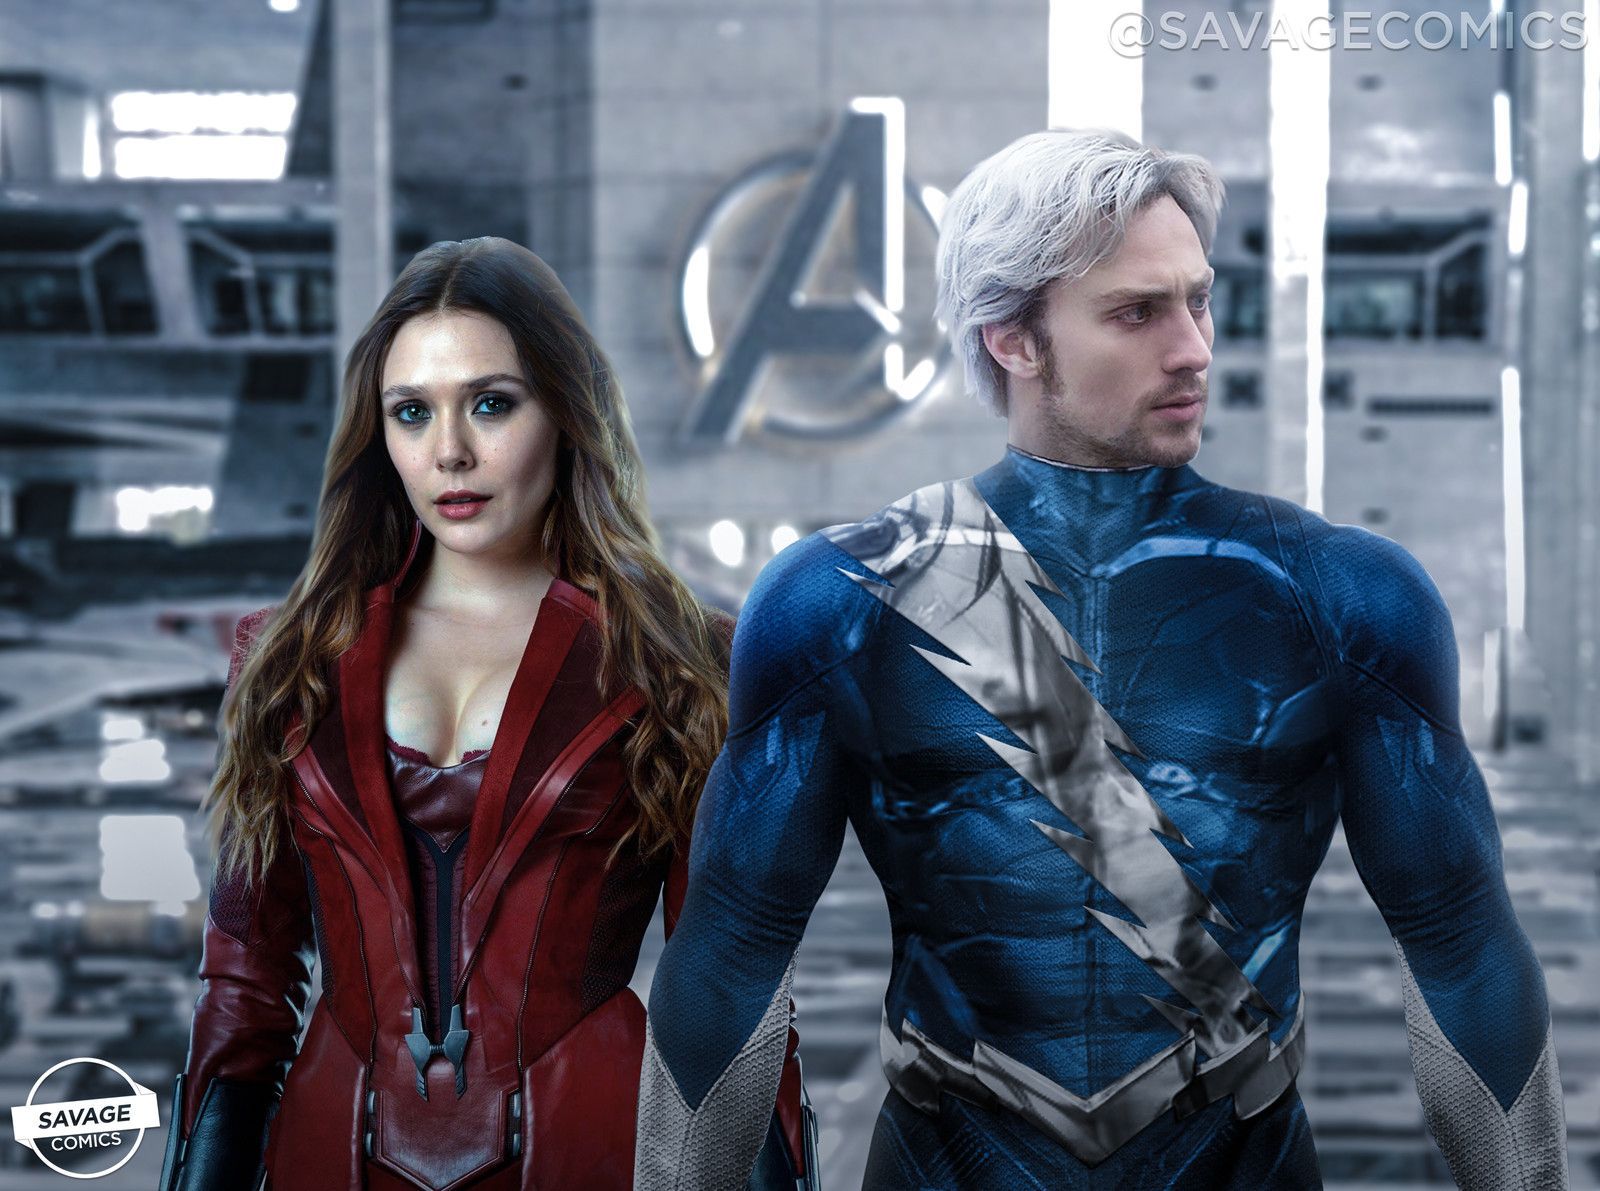 MCU Quicksilver And Scarlet Witch Artwork Y1gQ. Quicksilver Marvel, Scarlet Witch, Scarlet Witch Marvel